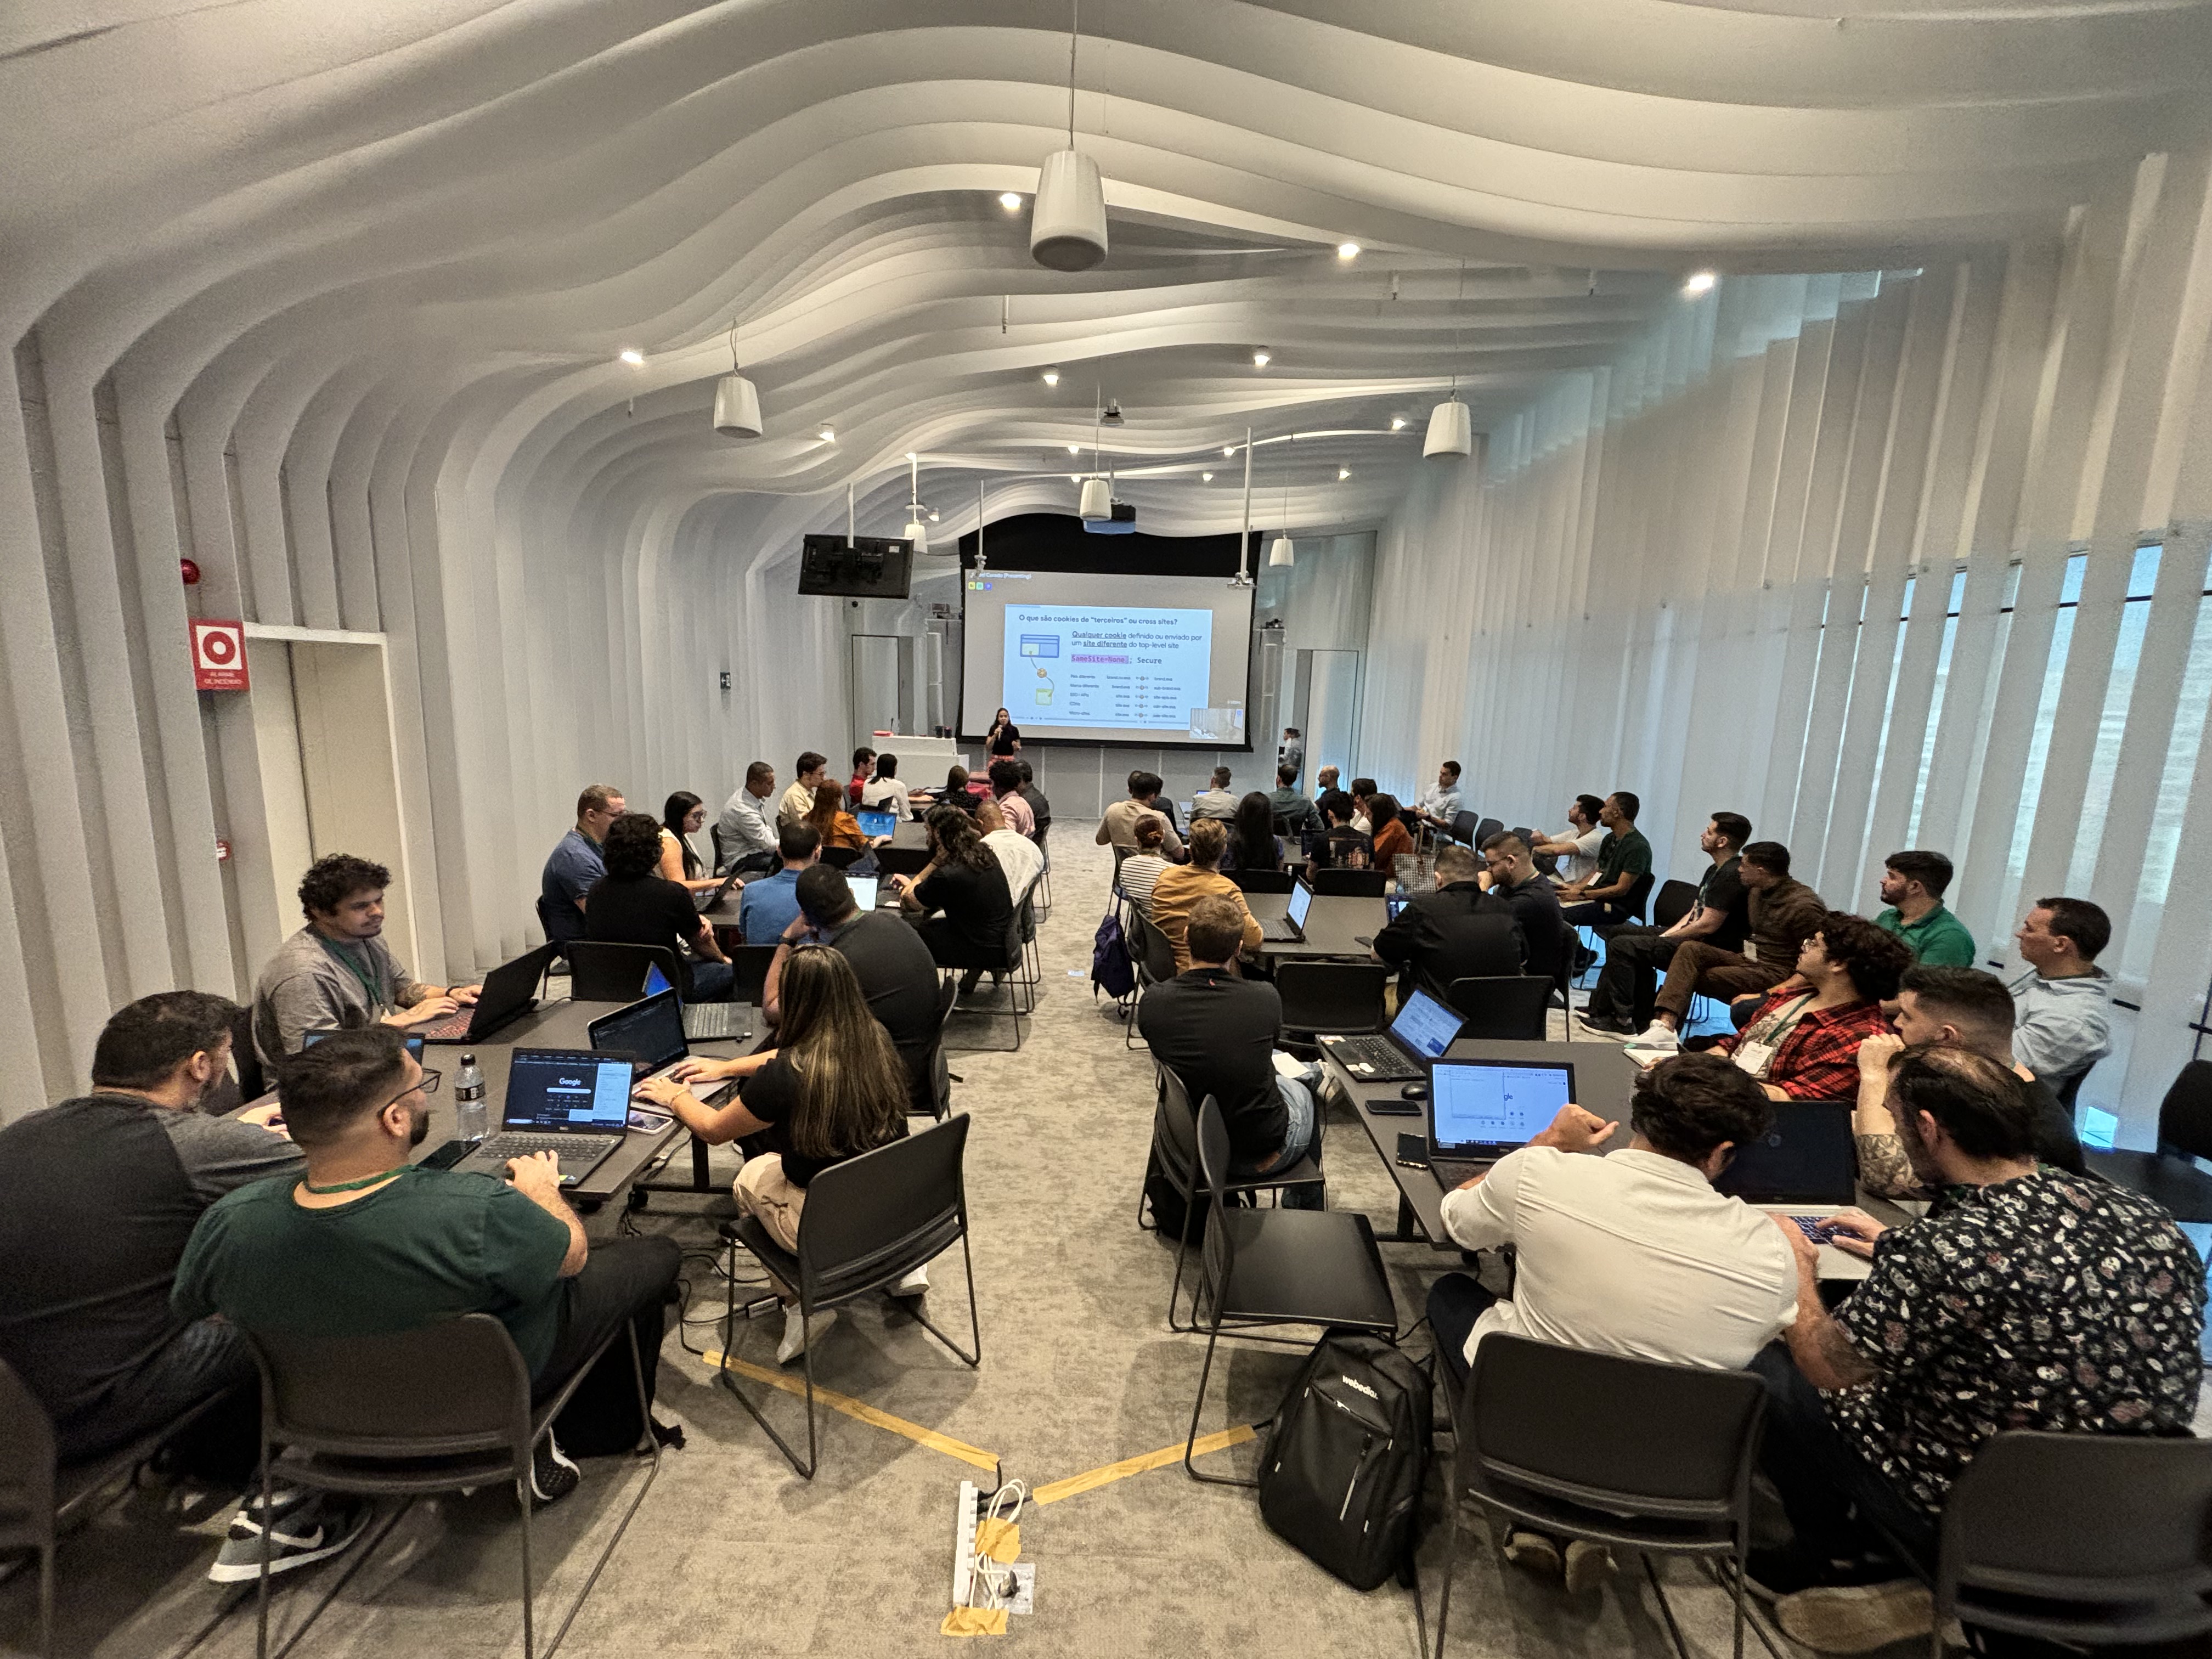 Snapshot of an ongoing 3PCD workshop in Sao Paulo